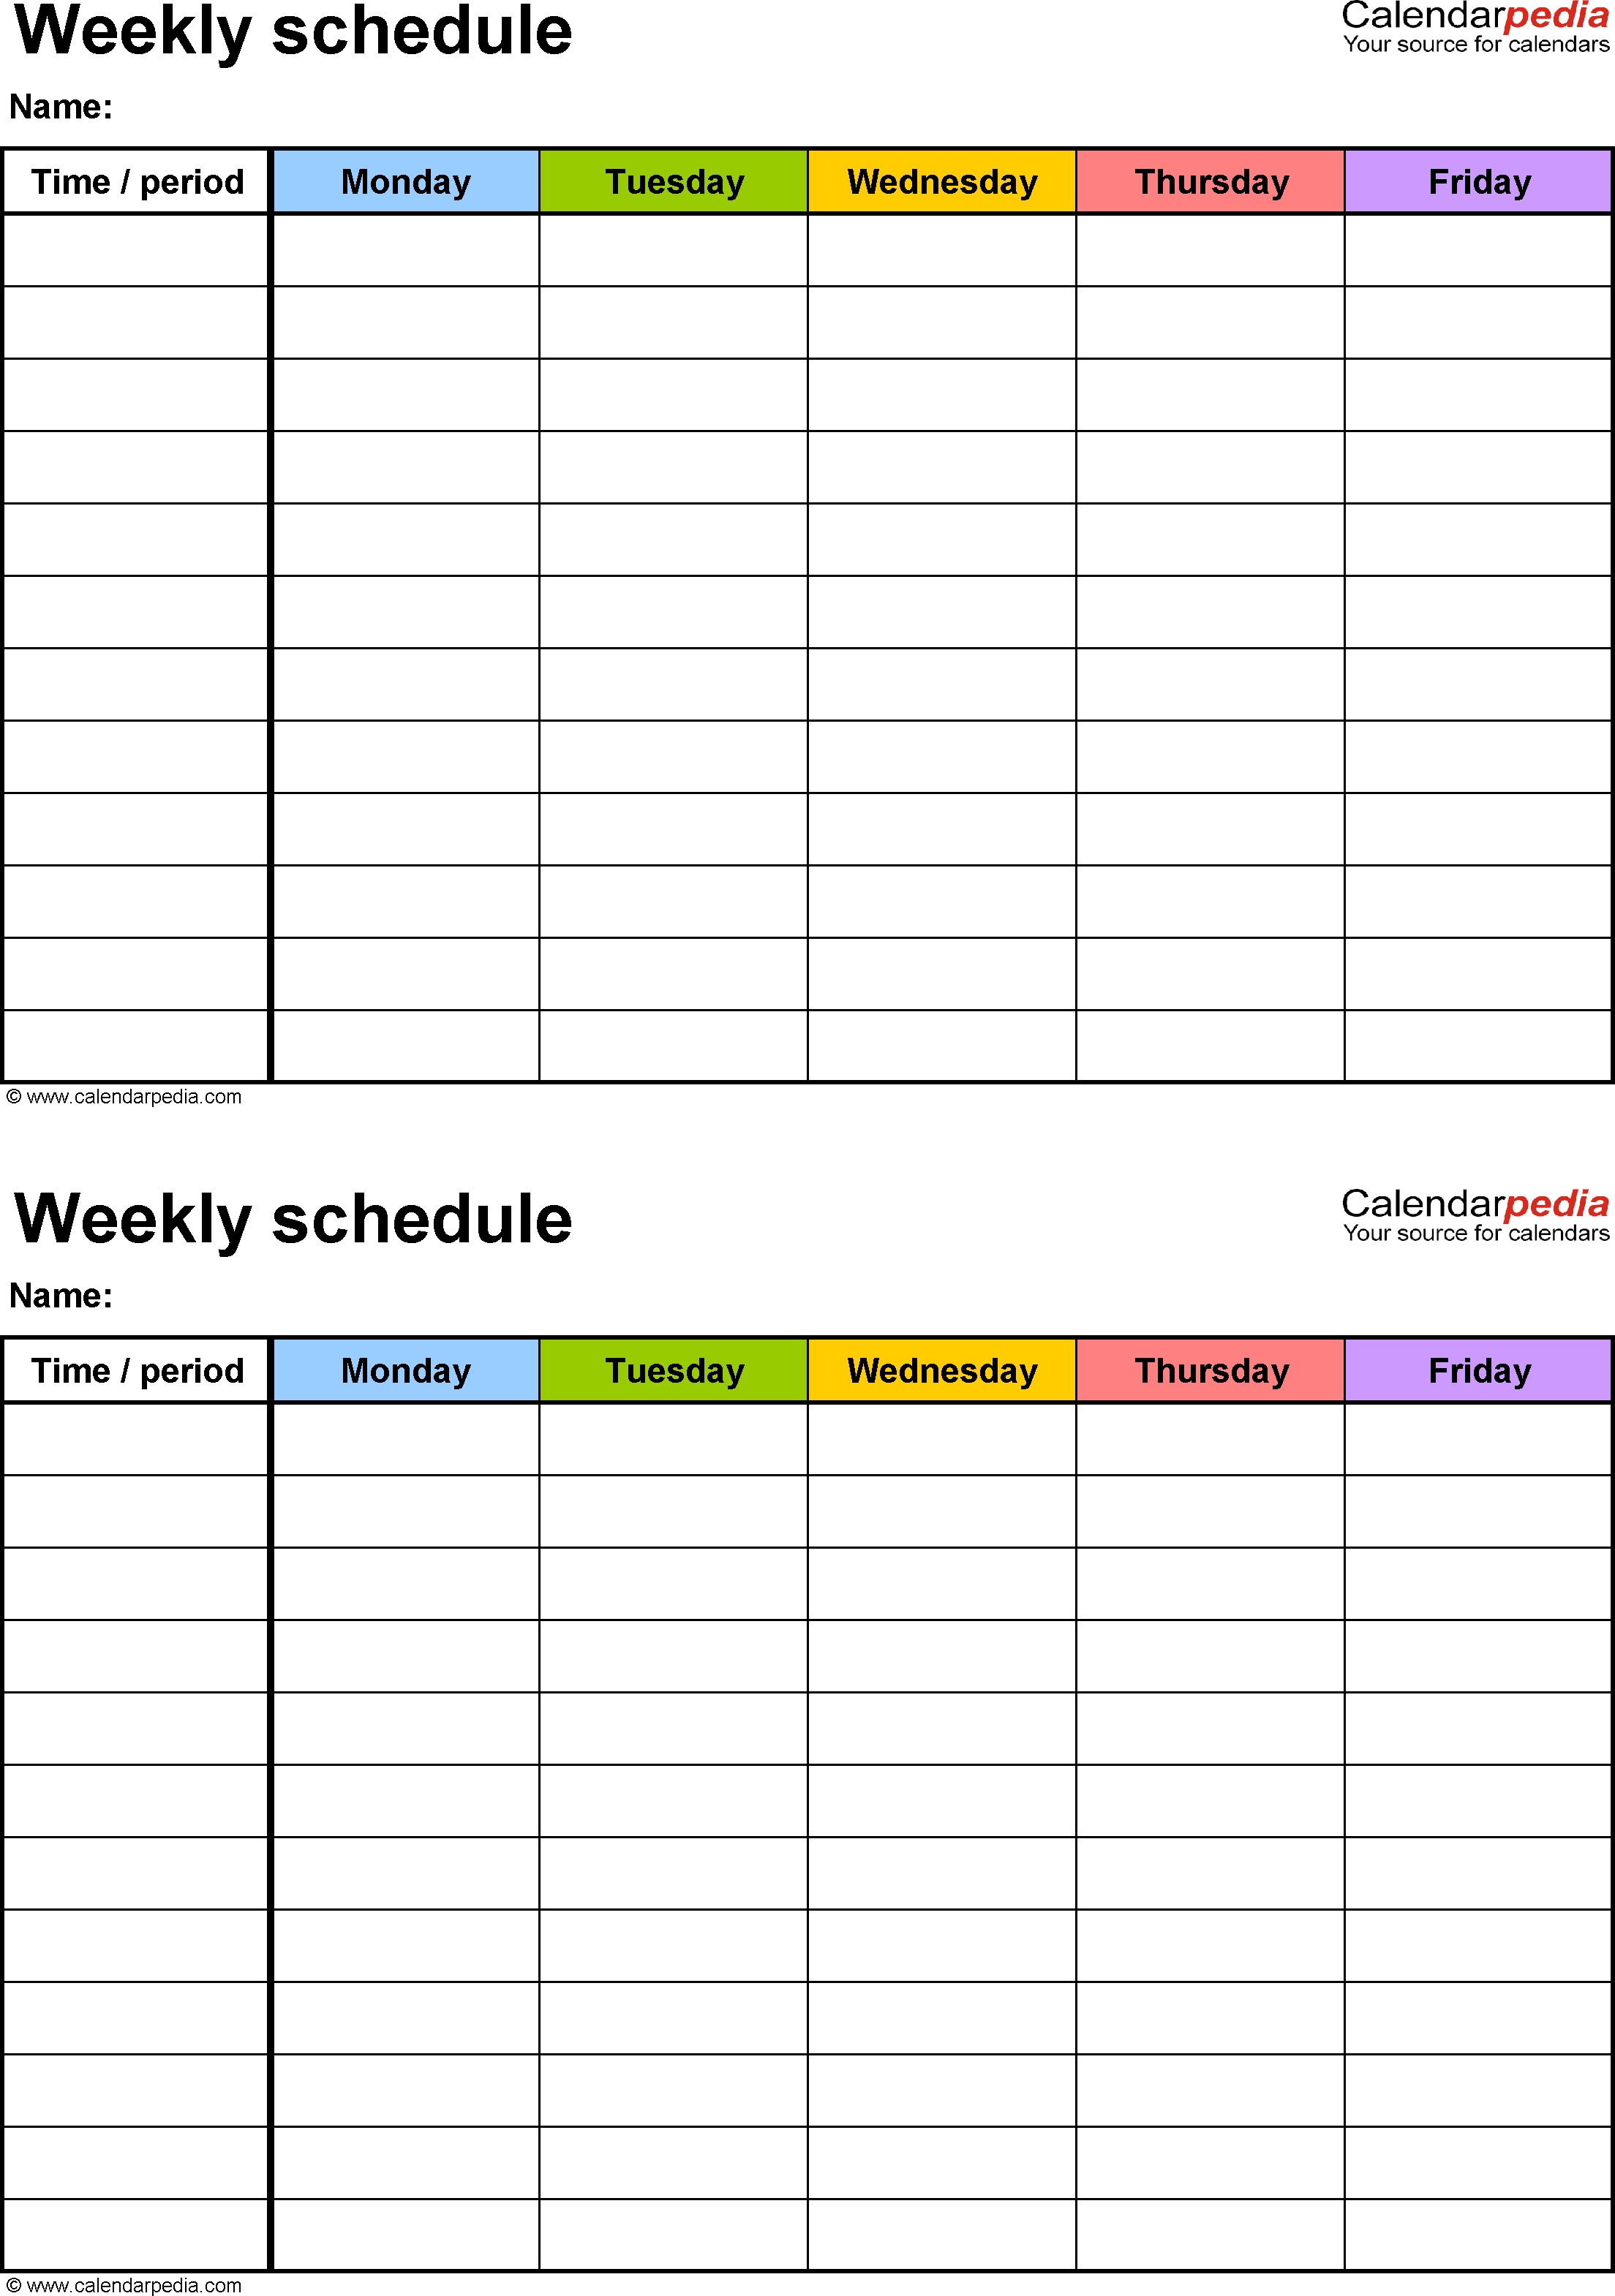 Weekly Schedule Template For Pdf Version 3: 2 Schedules On